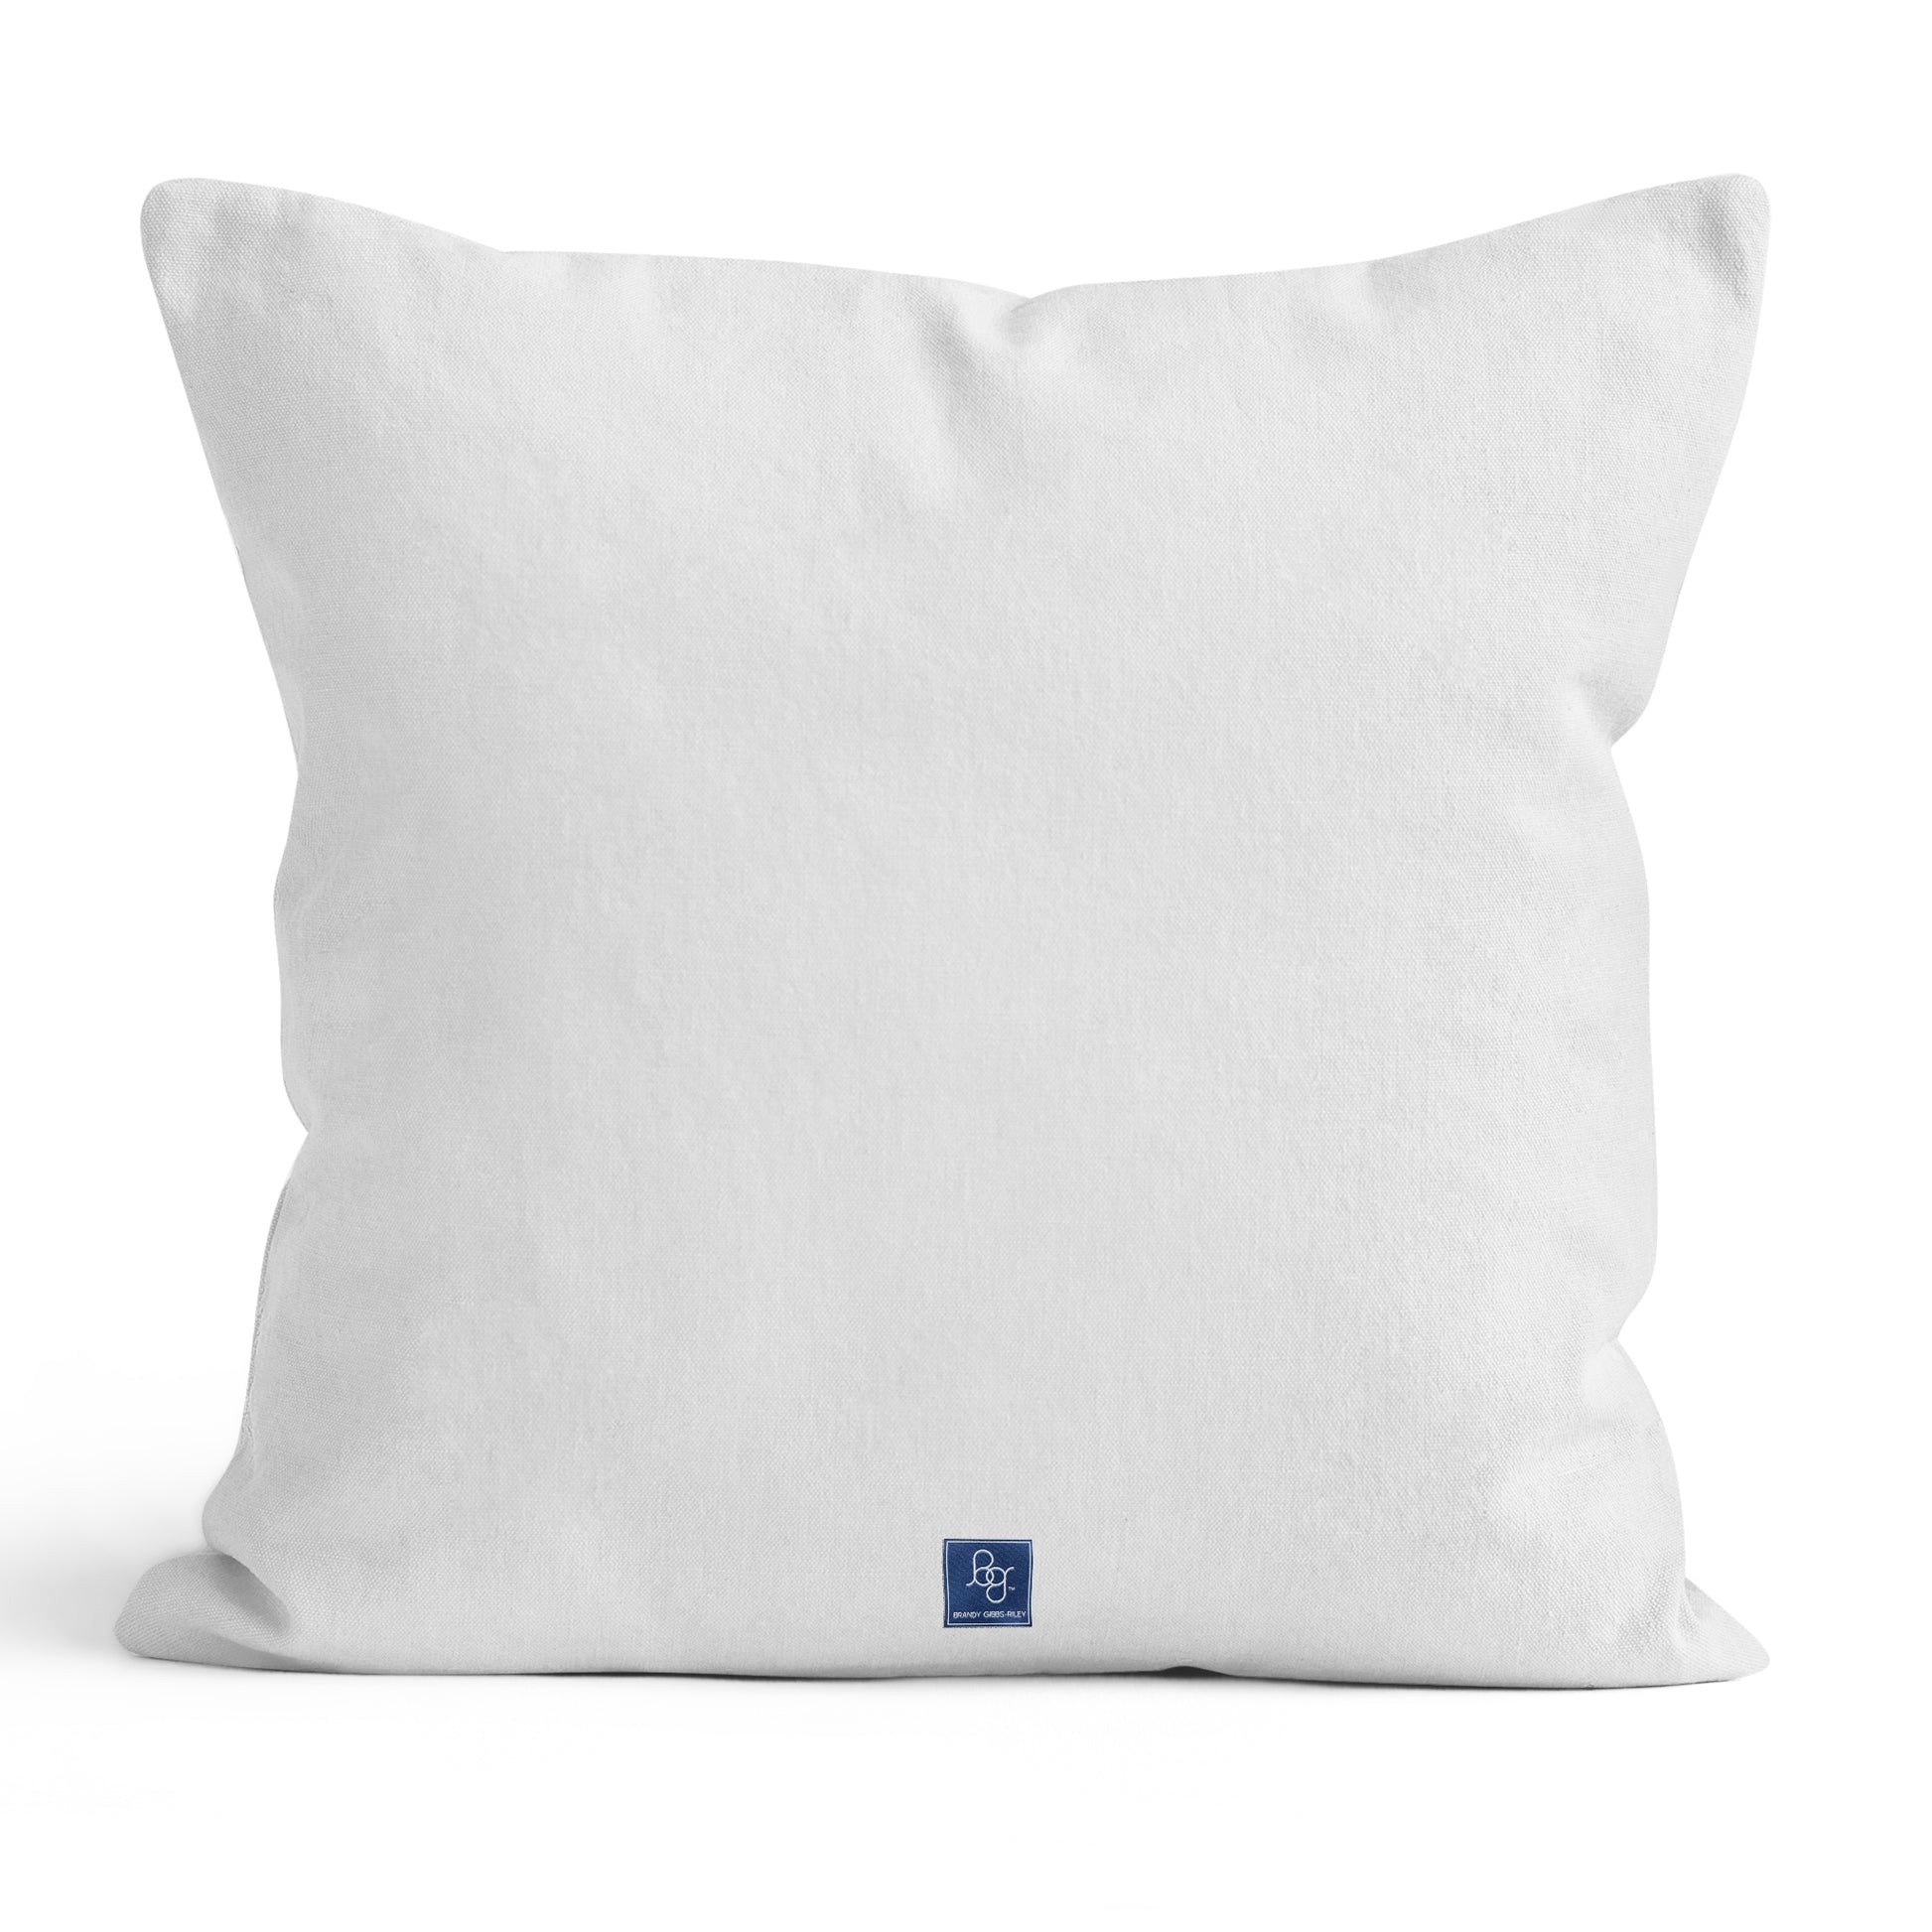 Back of pillow in white fabric with dark blue label